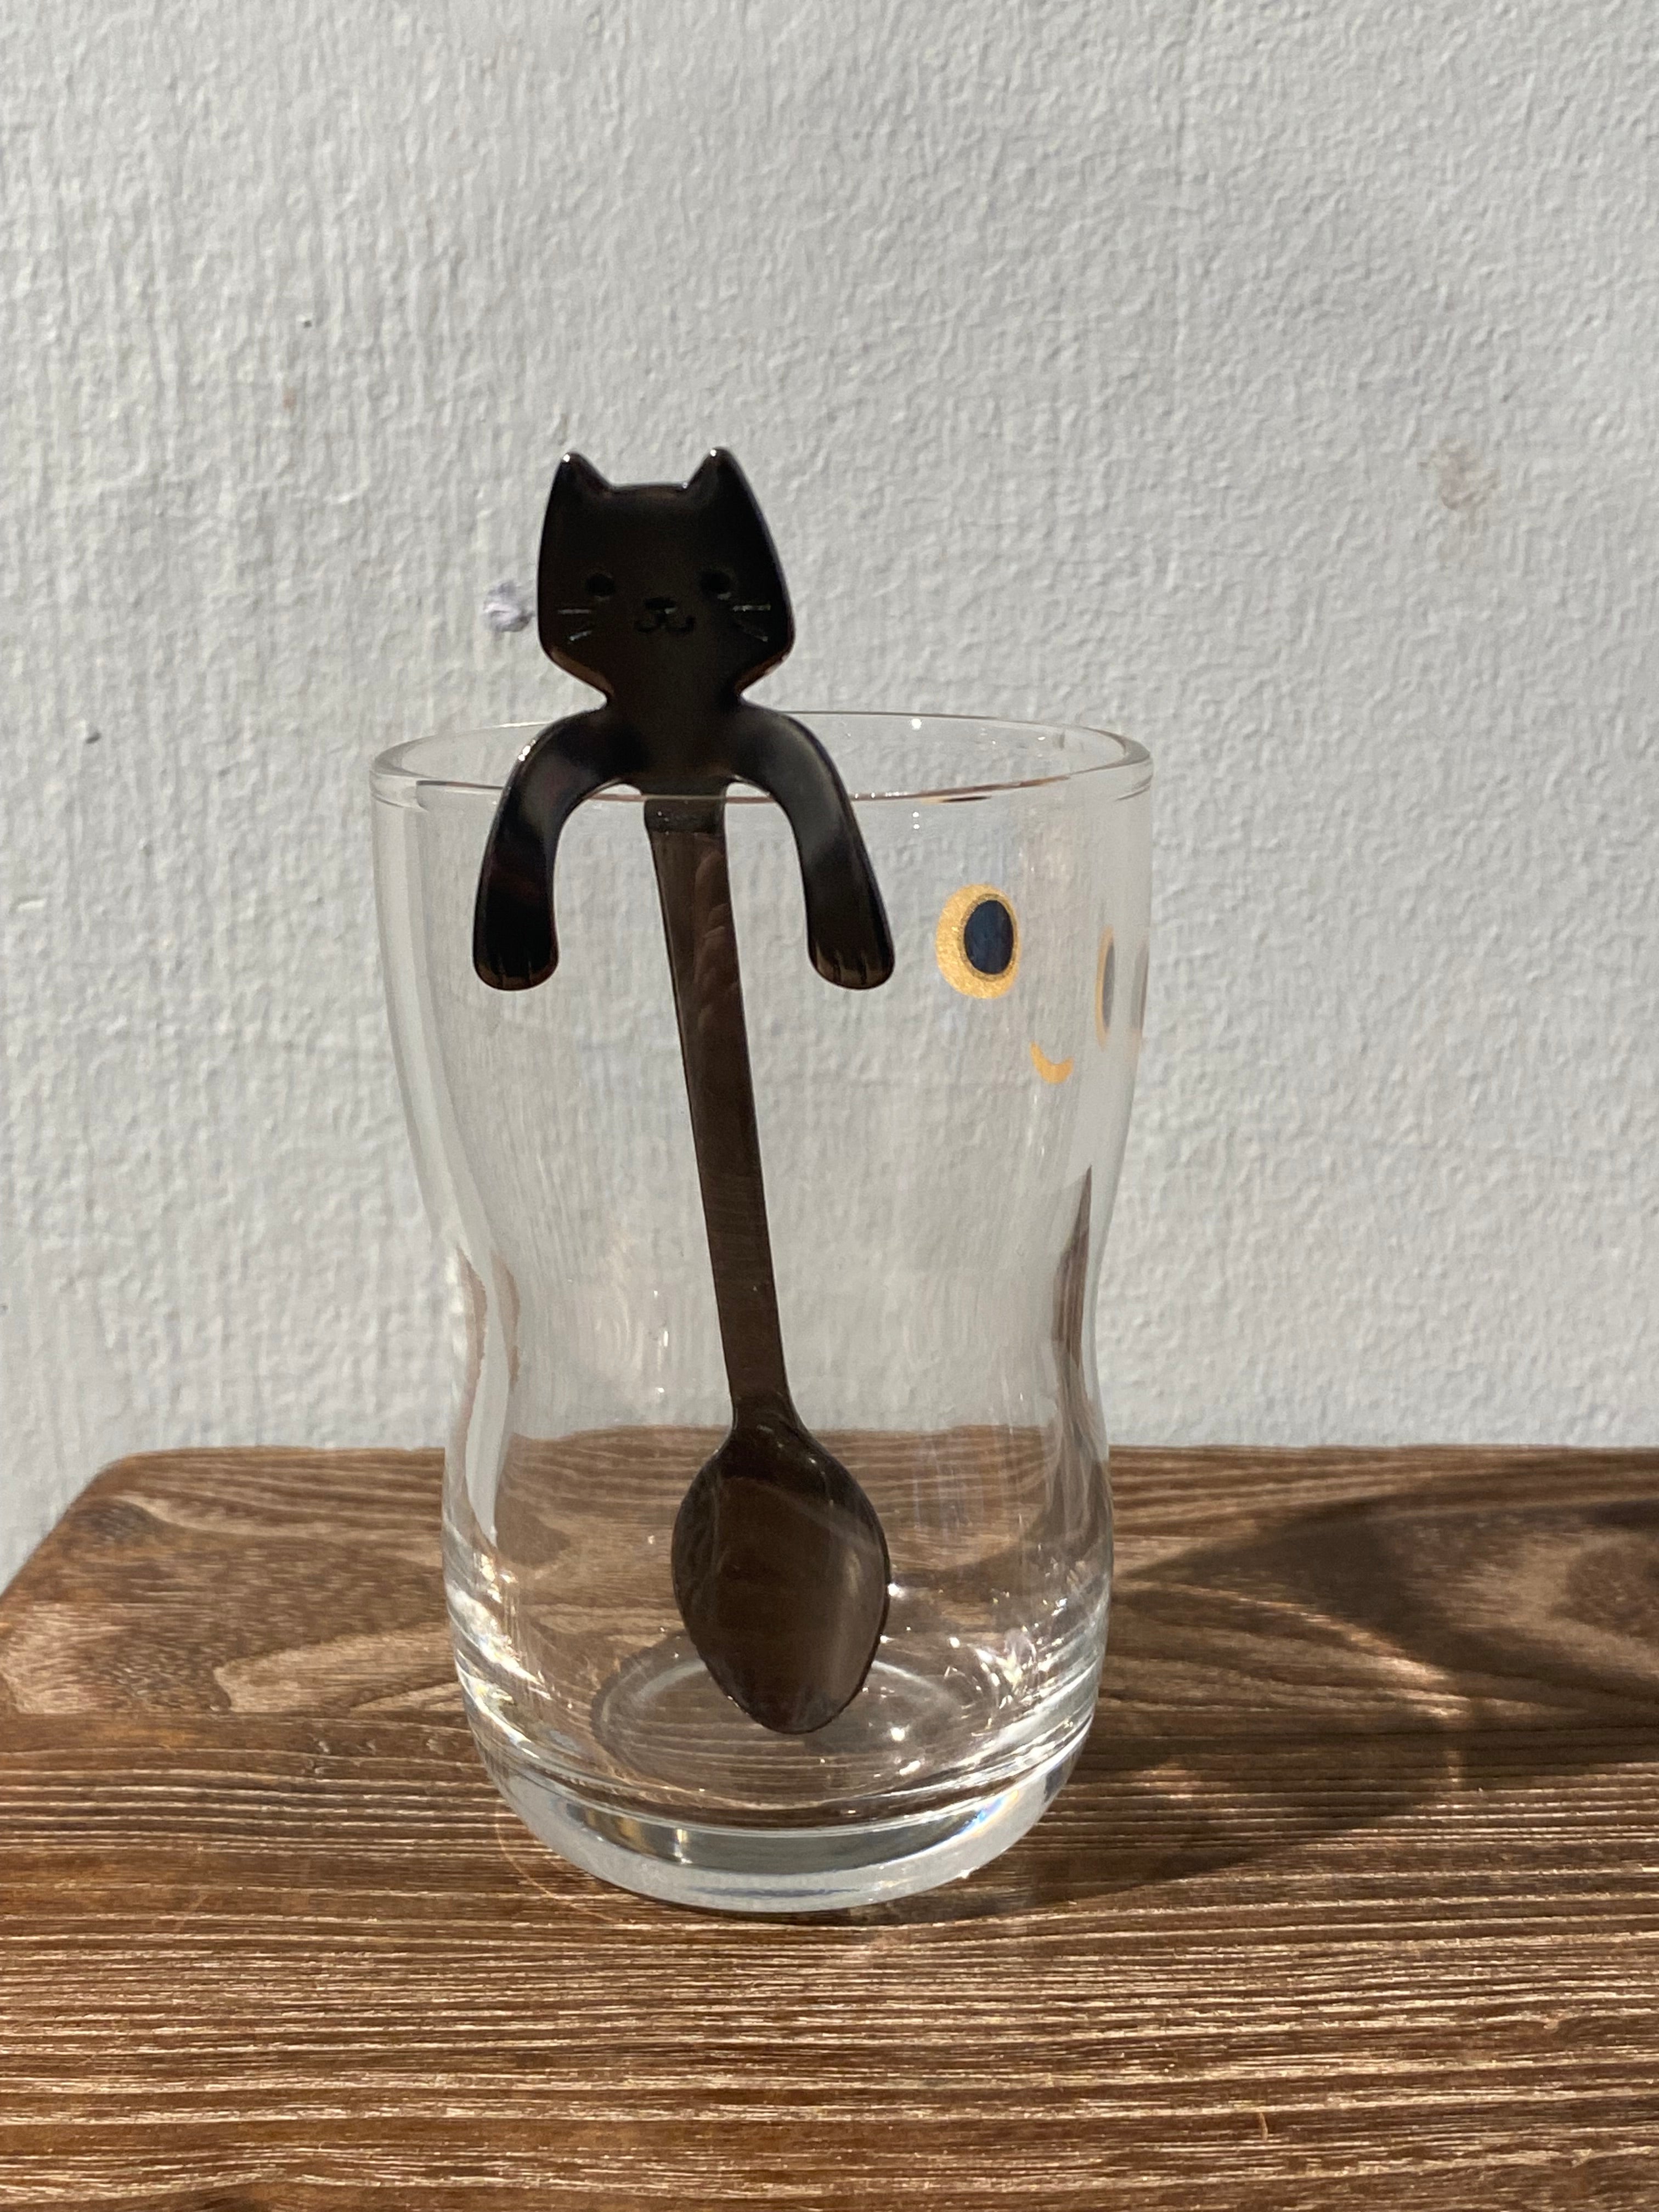 Steel spoon with cat